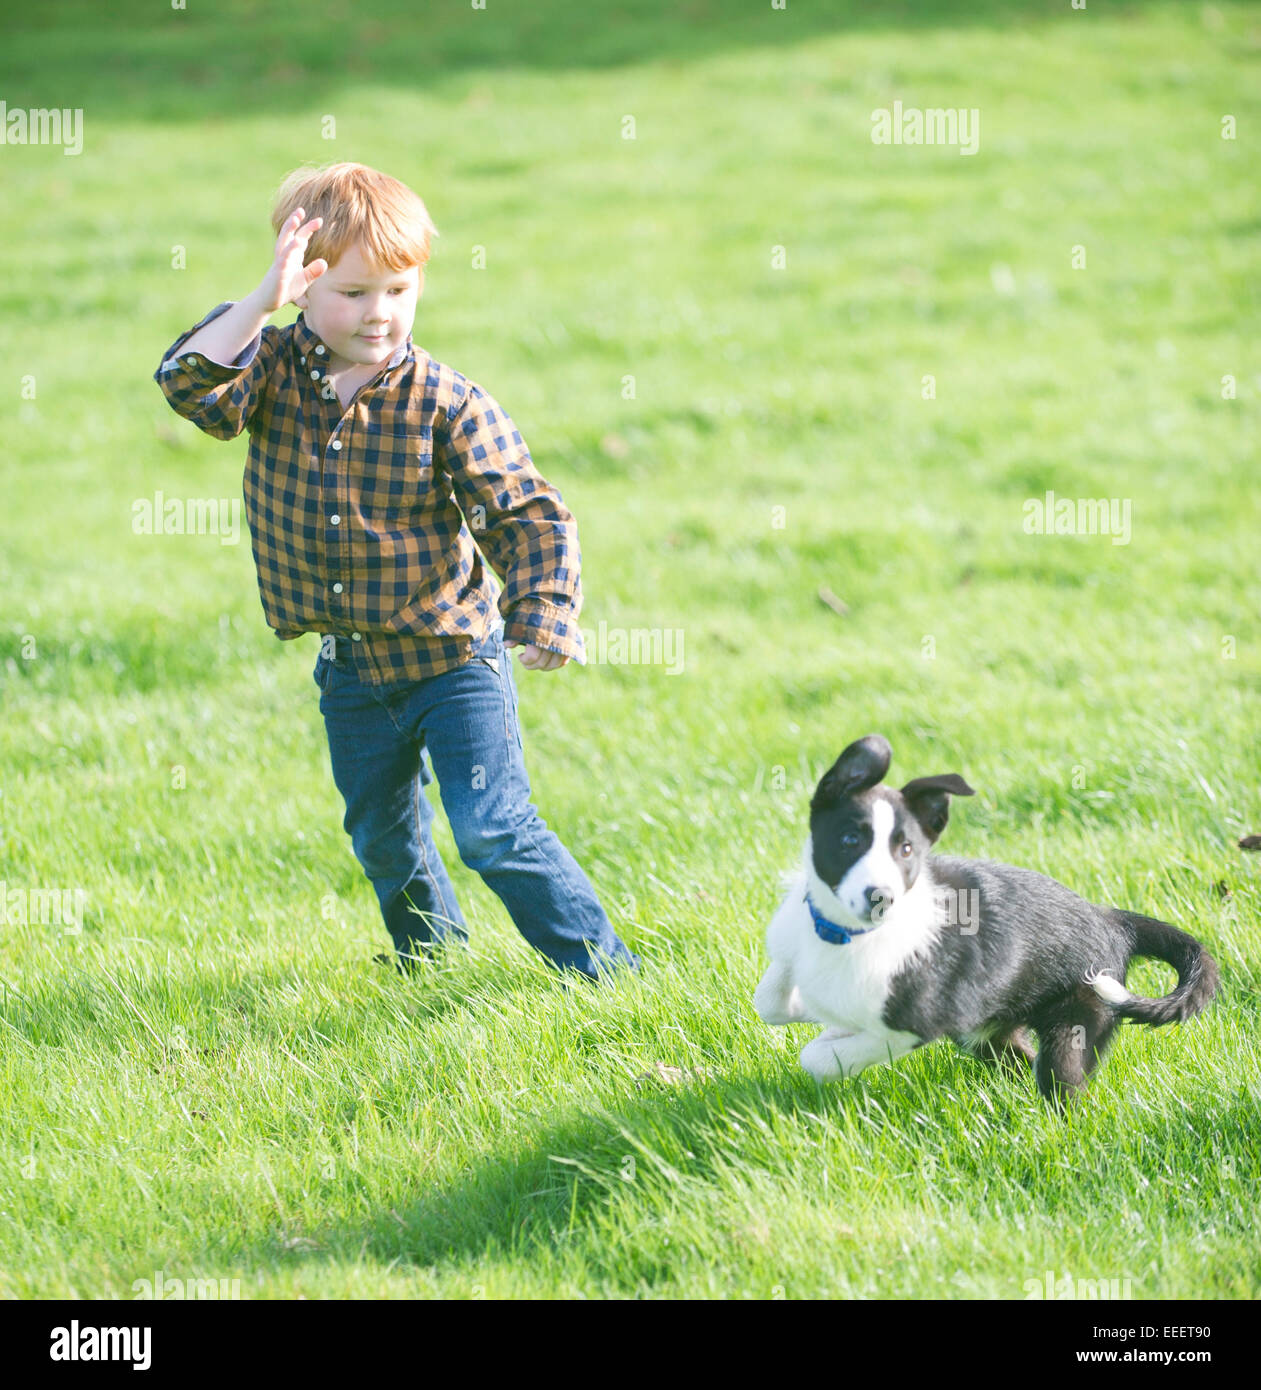 A young boy throwing a stick for a dog Stock Photo